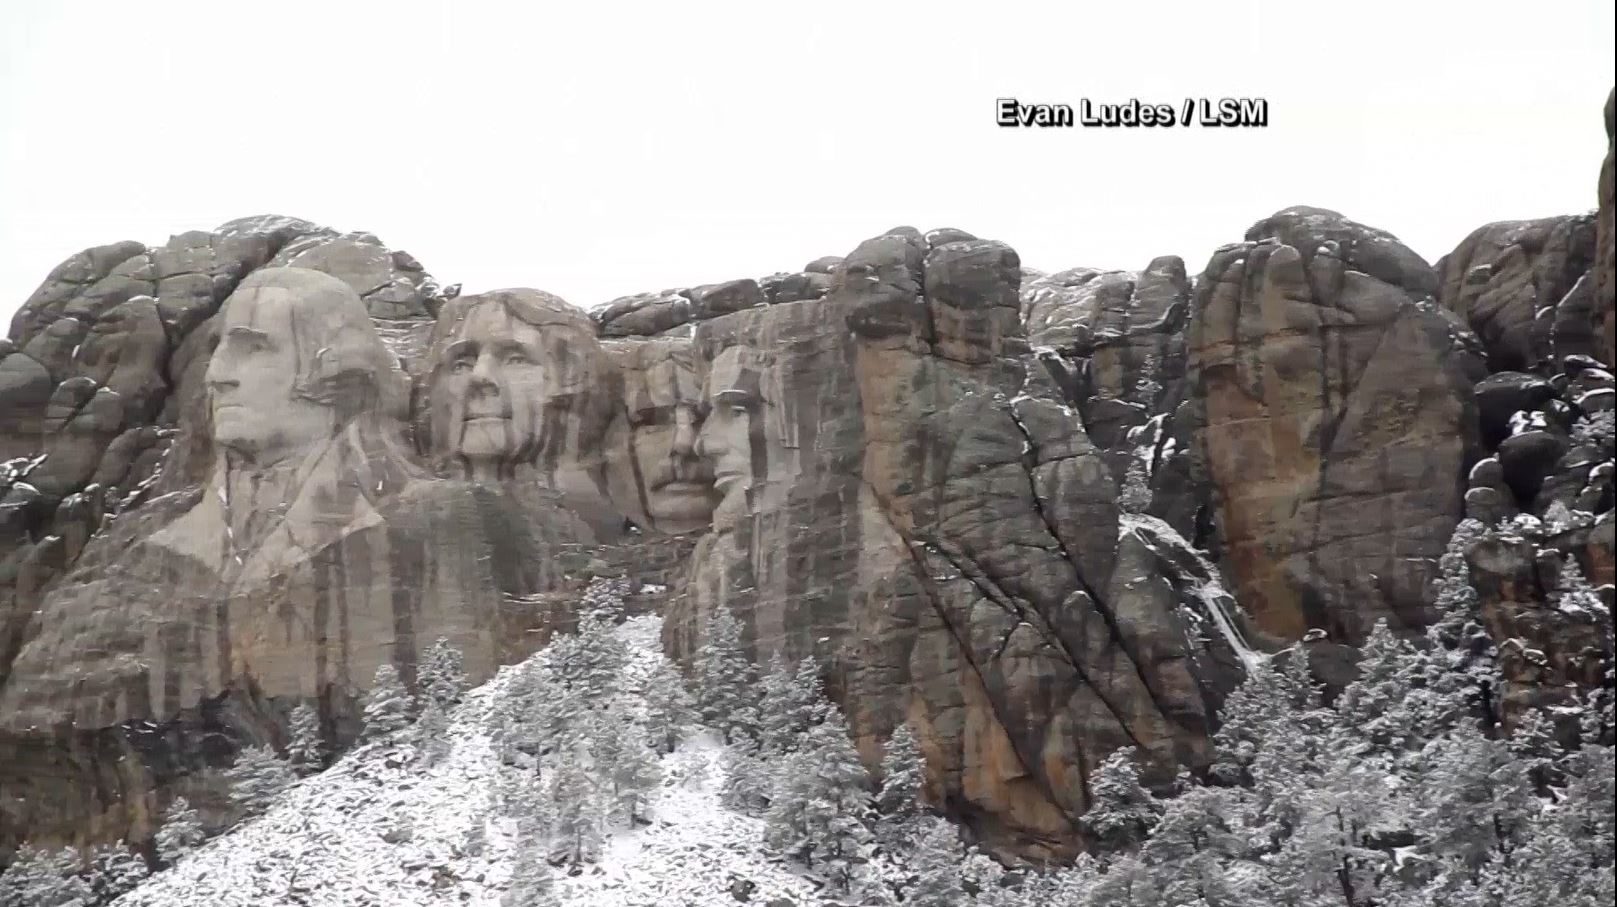 Snow covering up our famous presidents atop Mt. Rushmore.